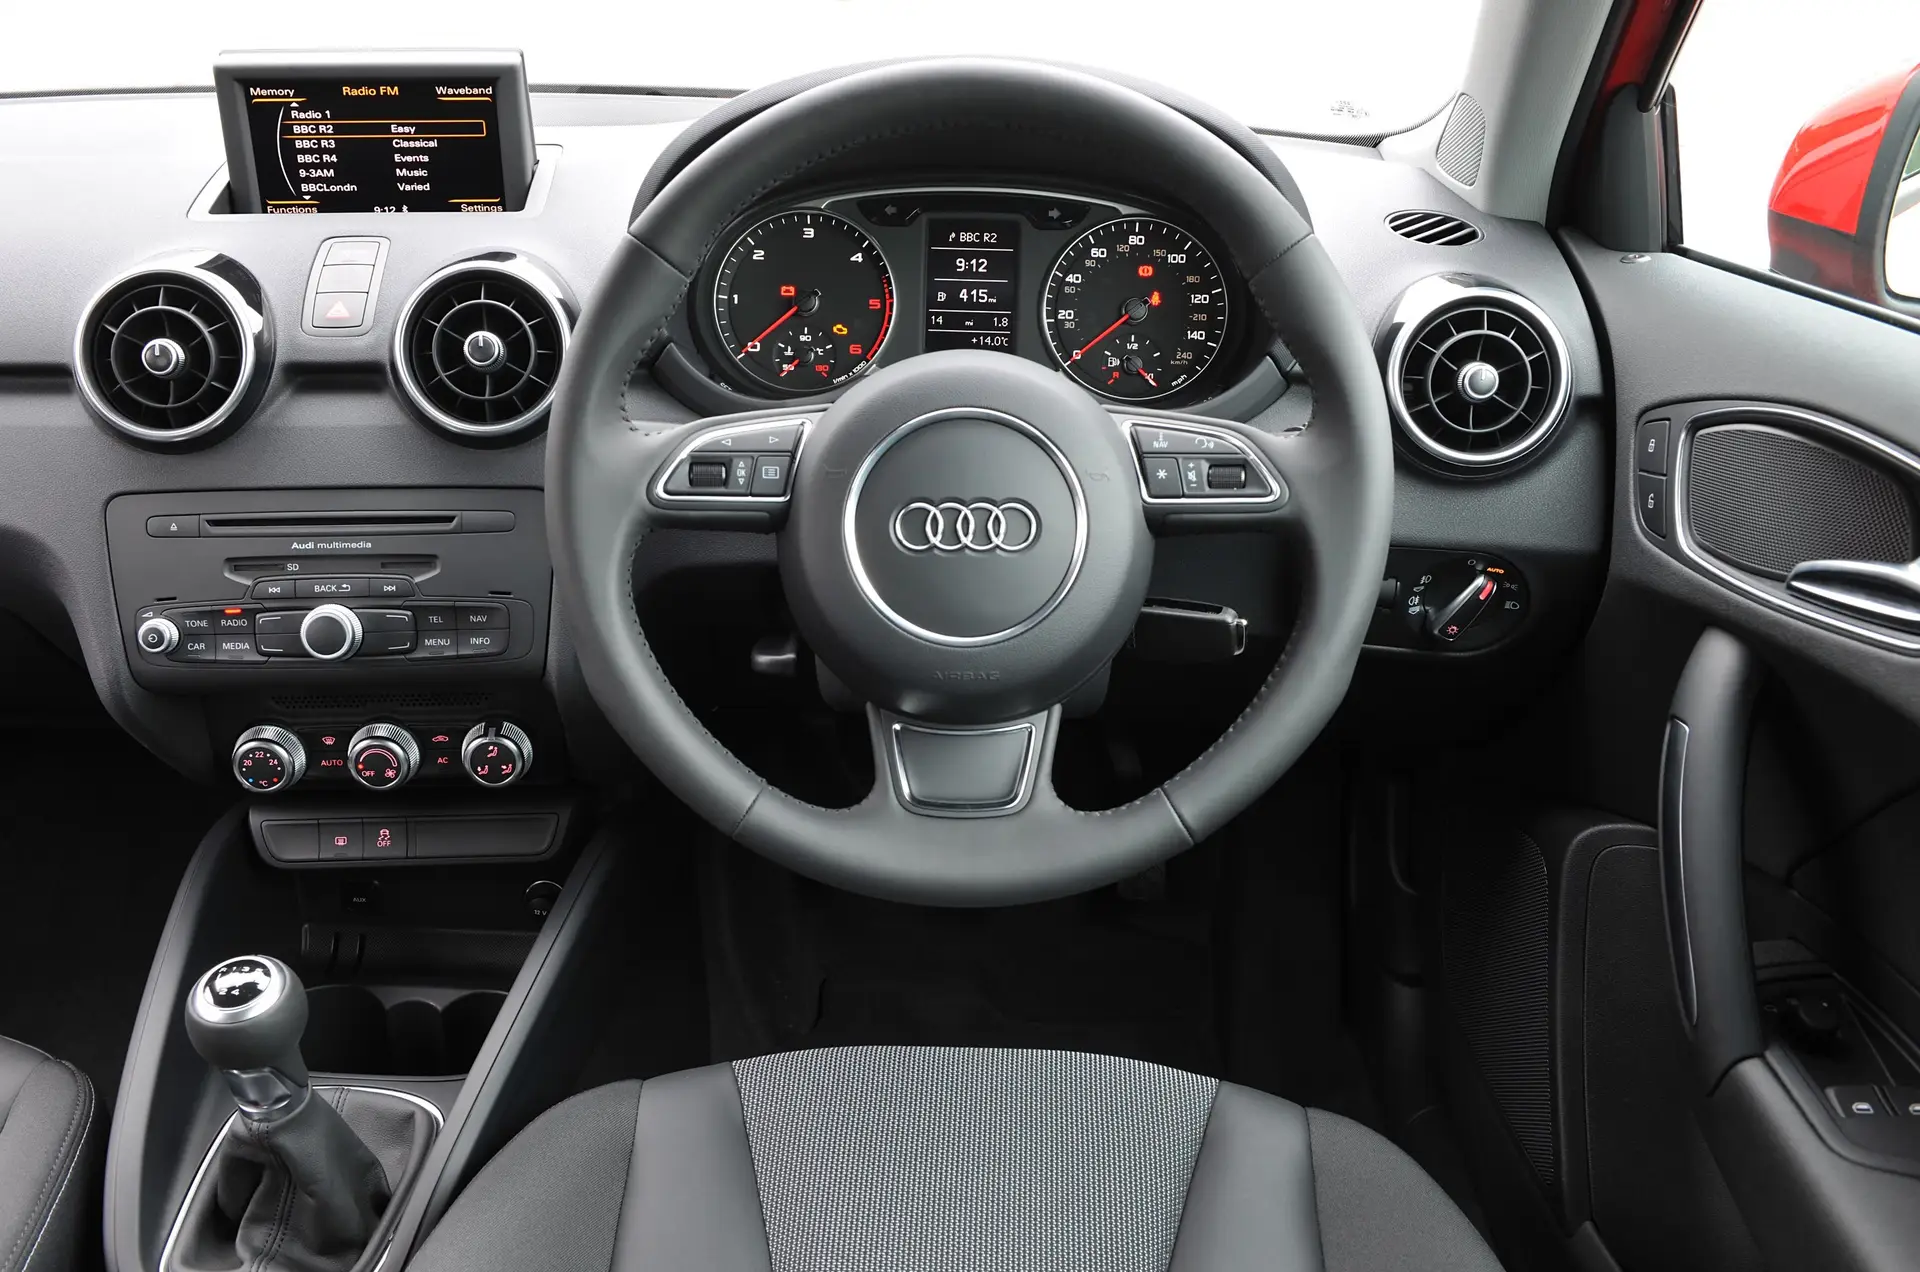 Audi A1 (2010-2018) Review: interior close up photo of the Audi A1 dashboard